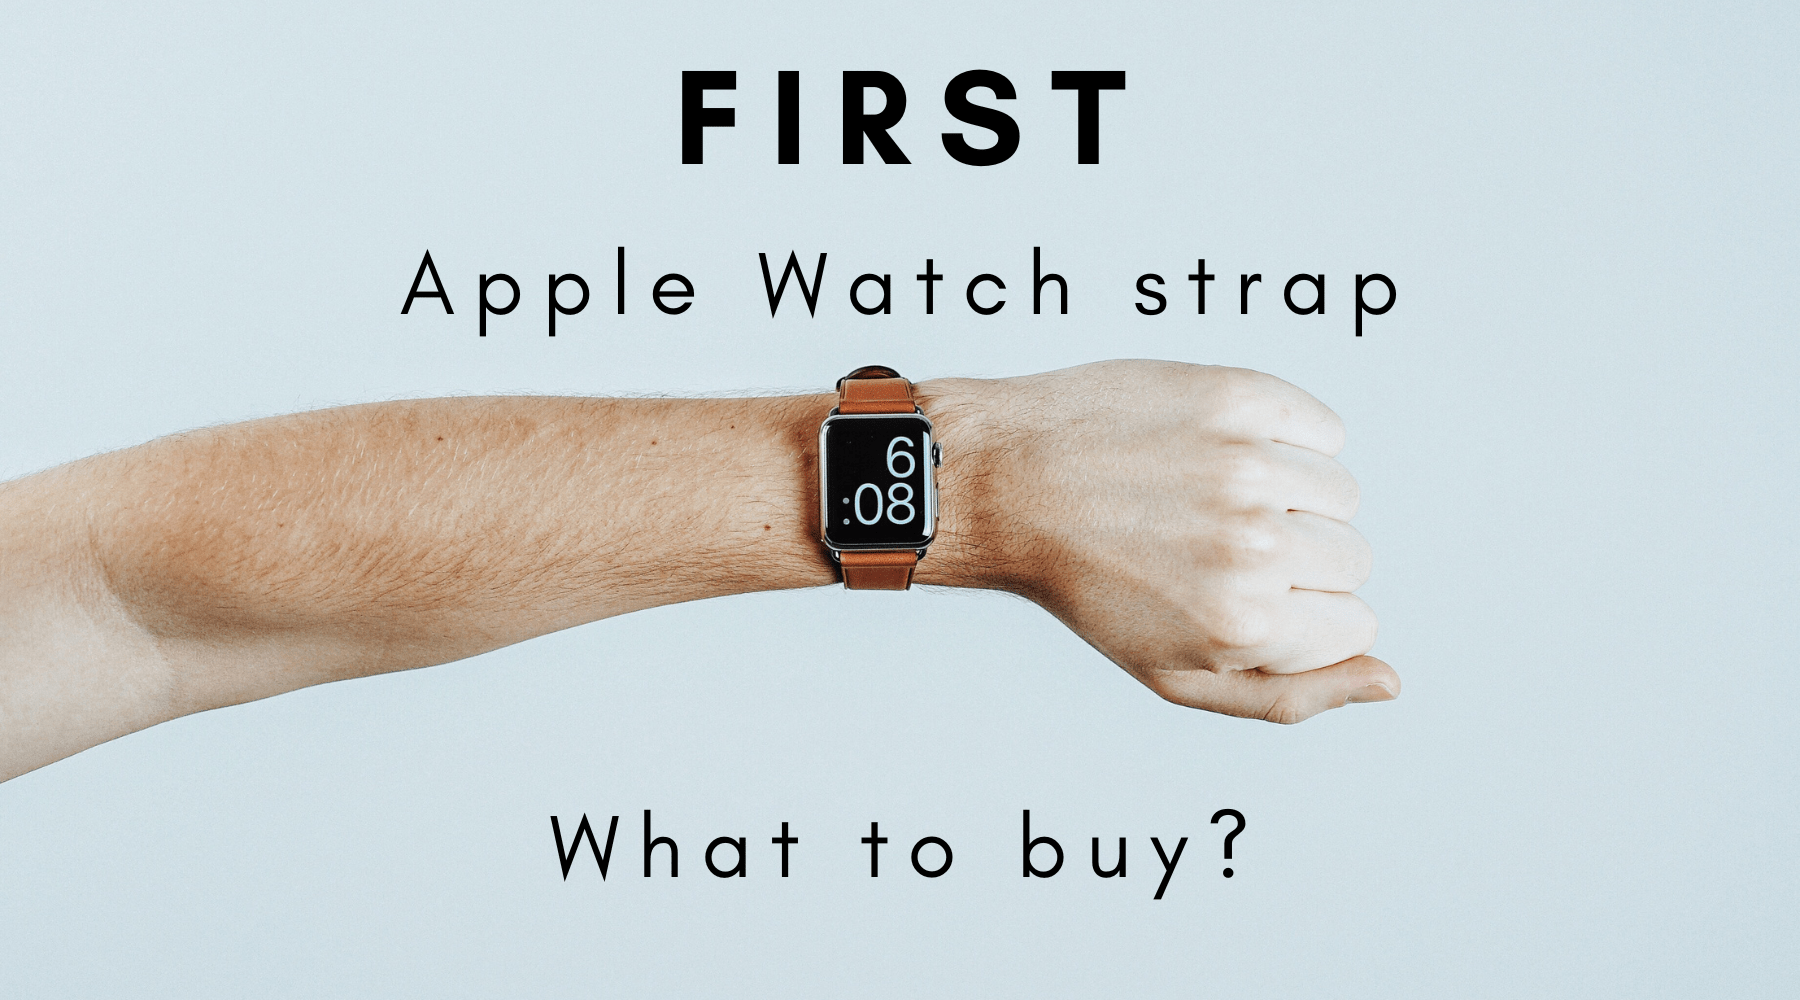 The Best First Strap for your Apple Watch - Buckle and Band